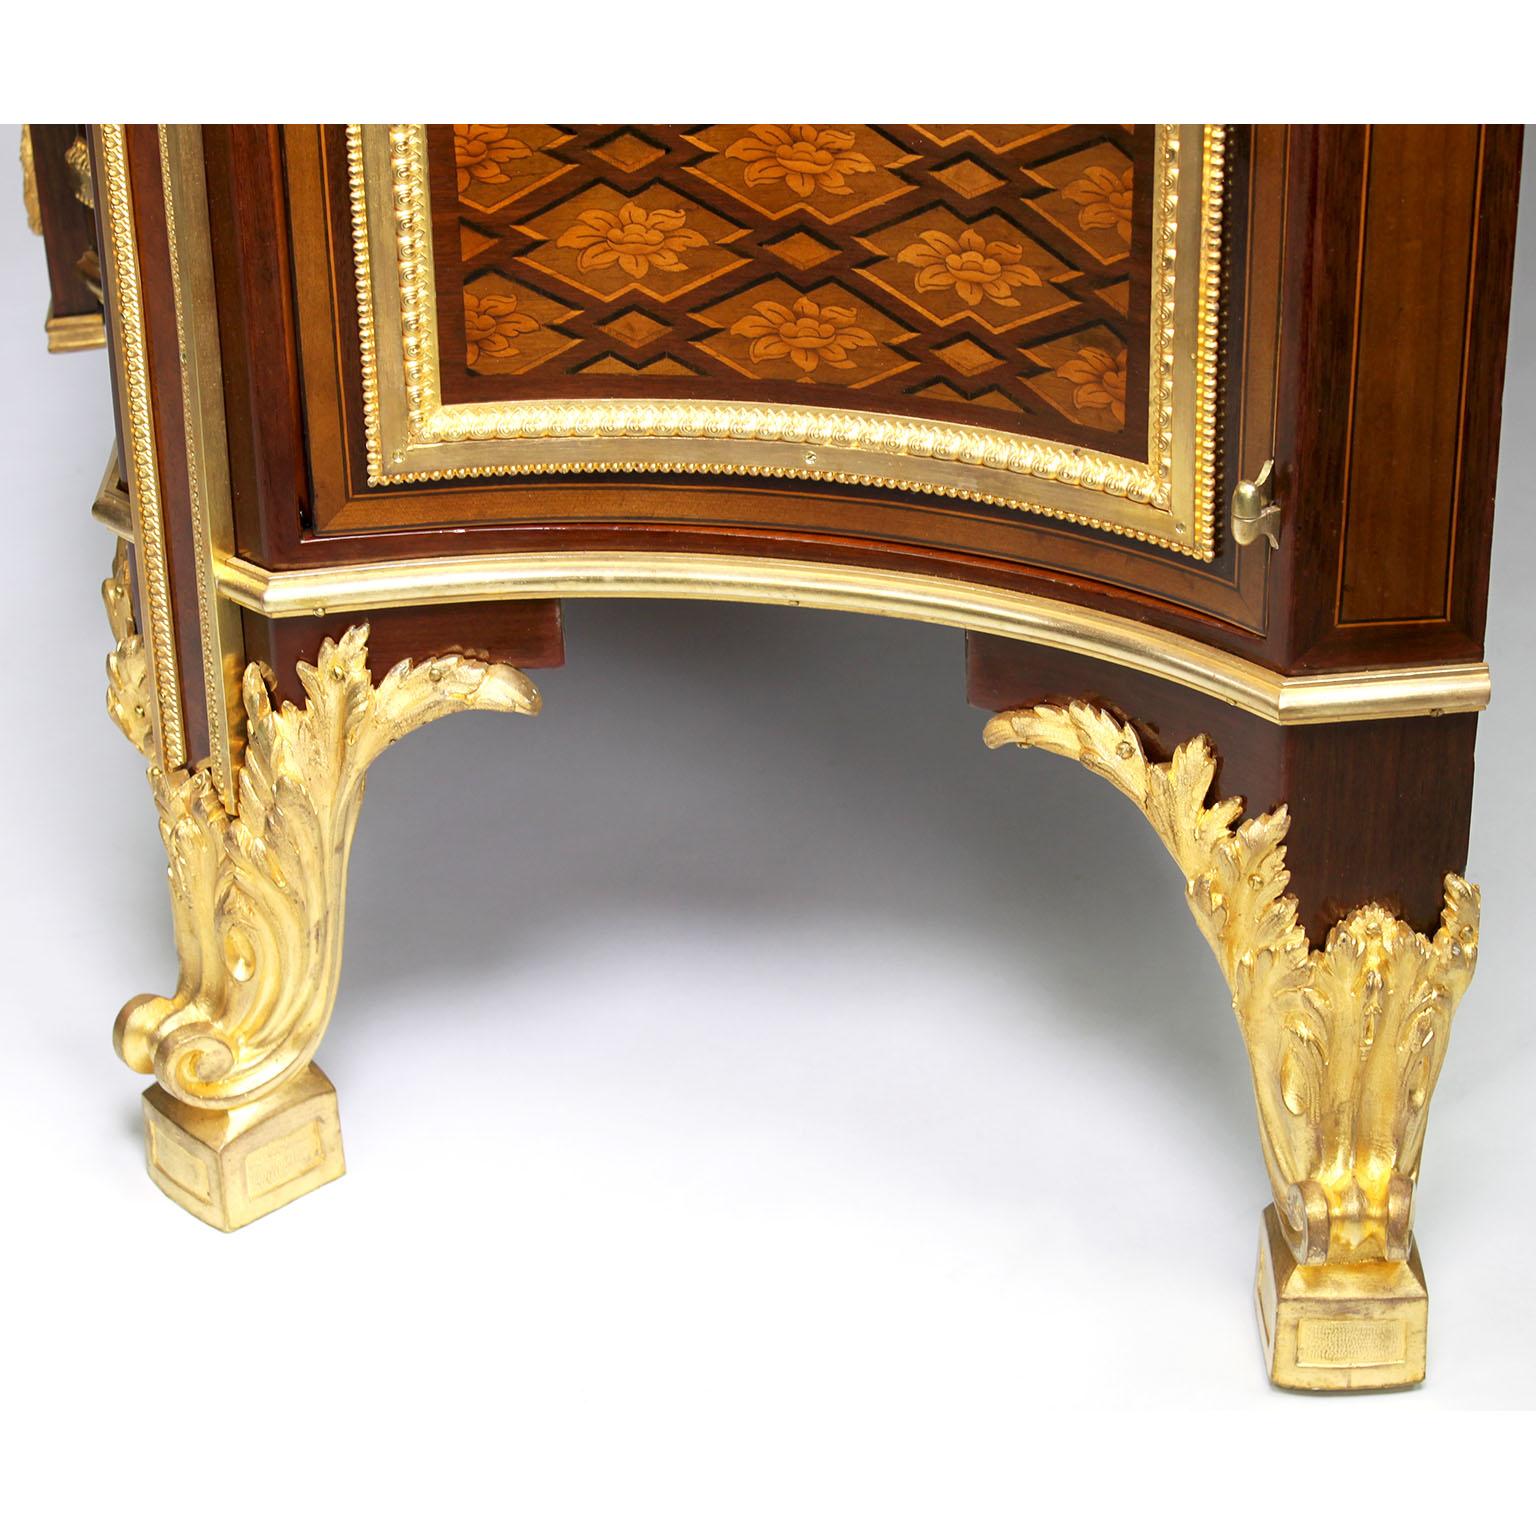 French 19th Century Louis XV-XVI Ormolu Mounted Marquetry Commode Marble Top For Sale 10